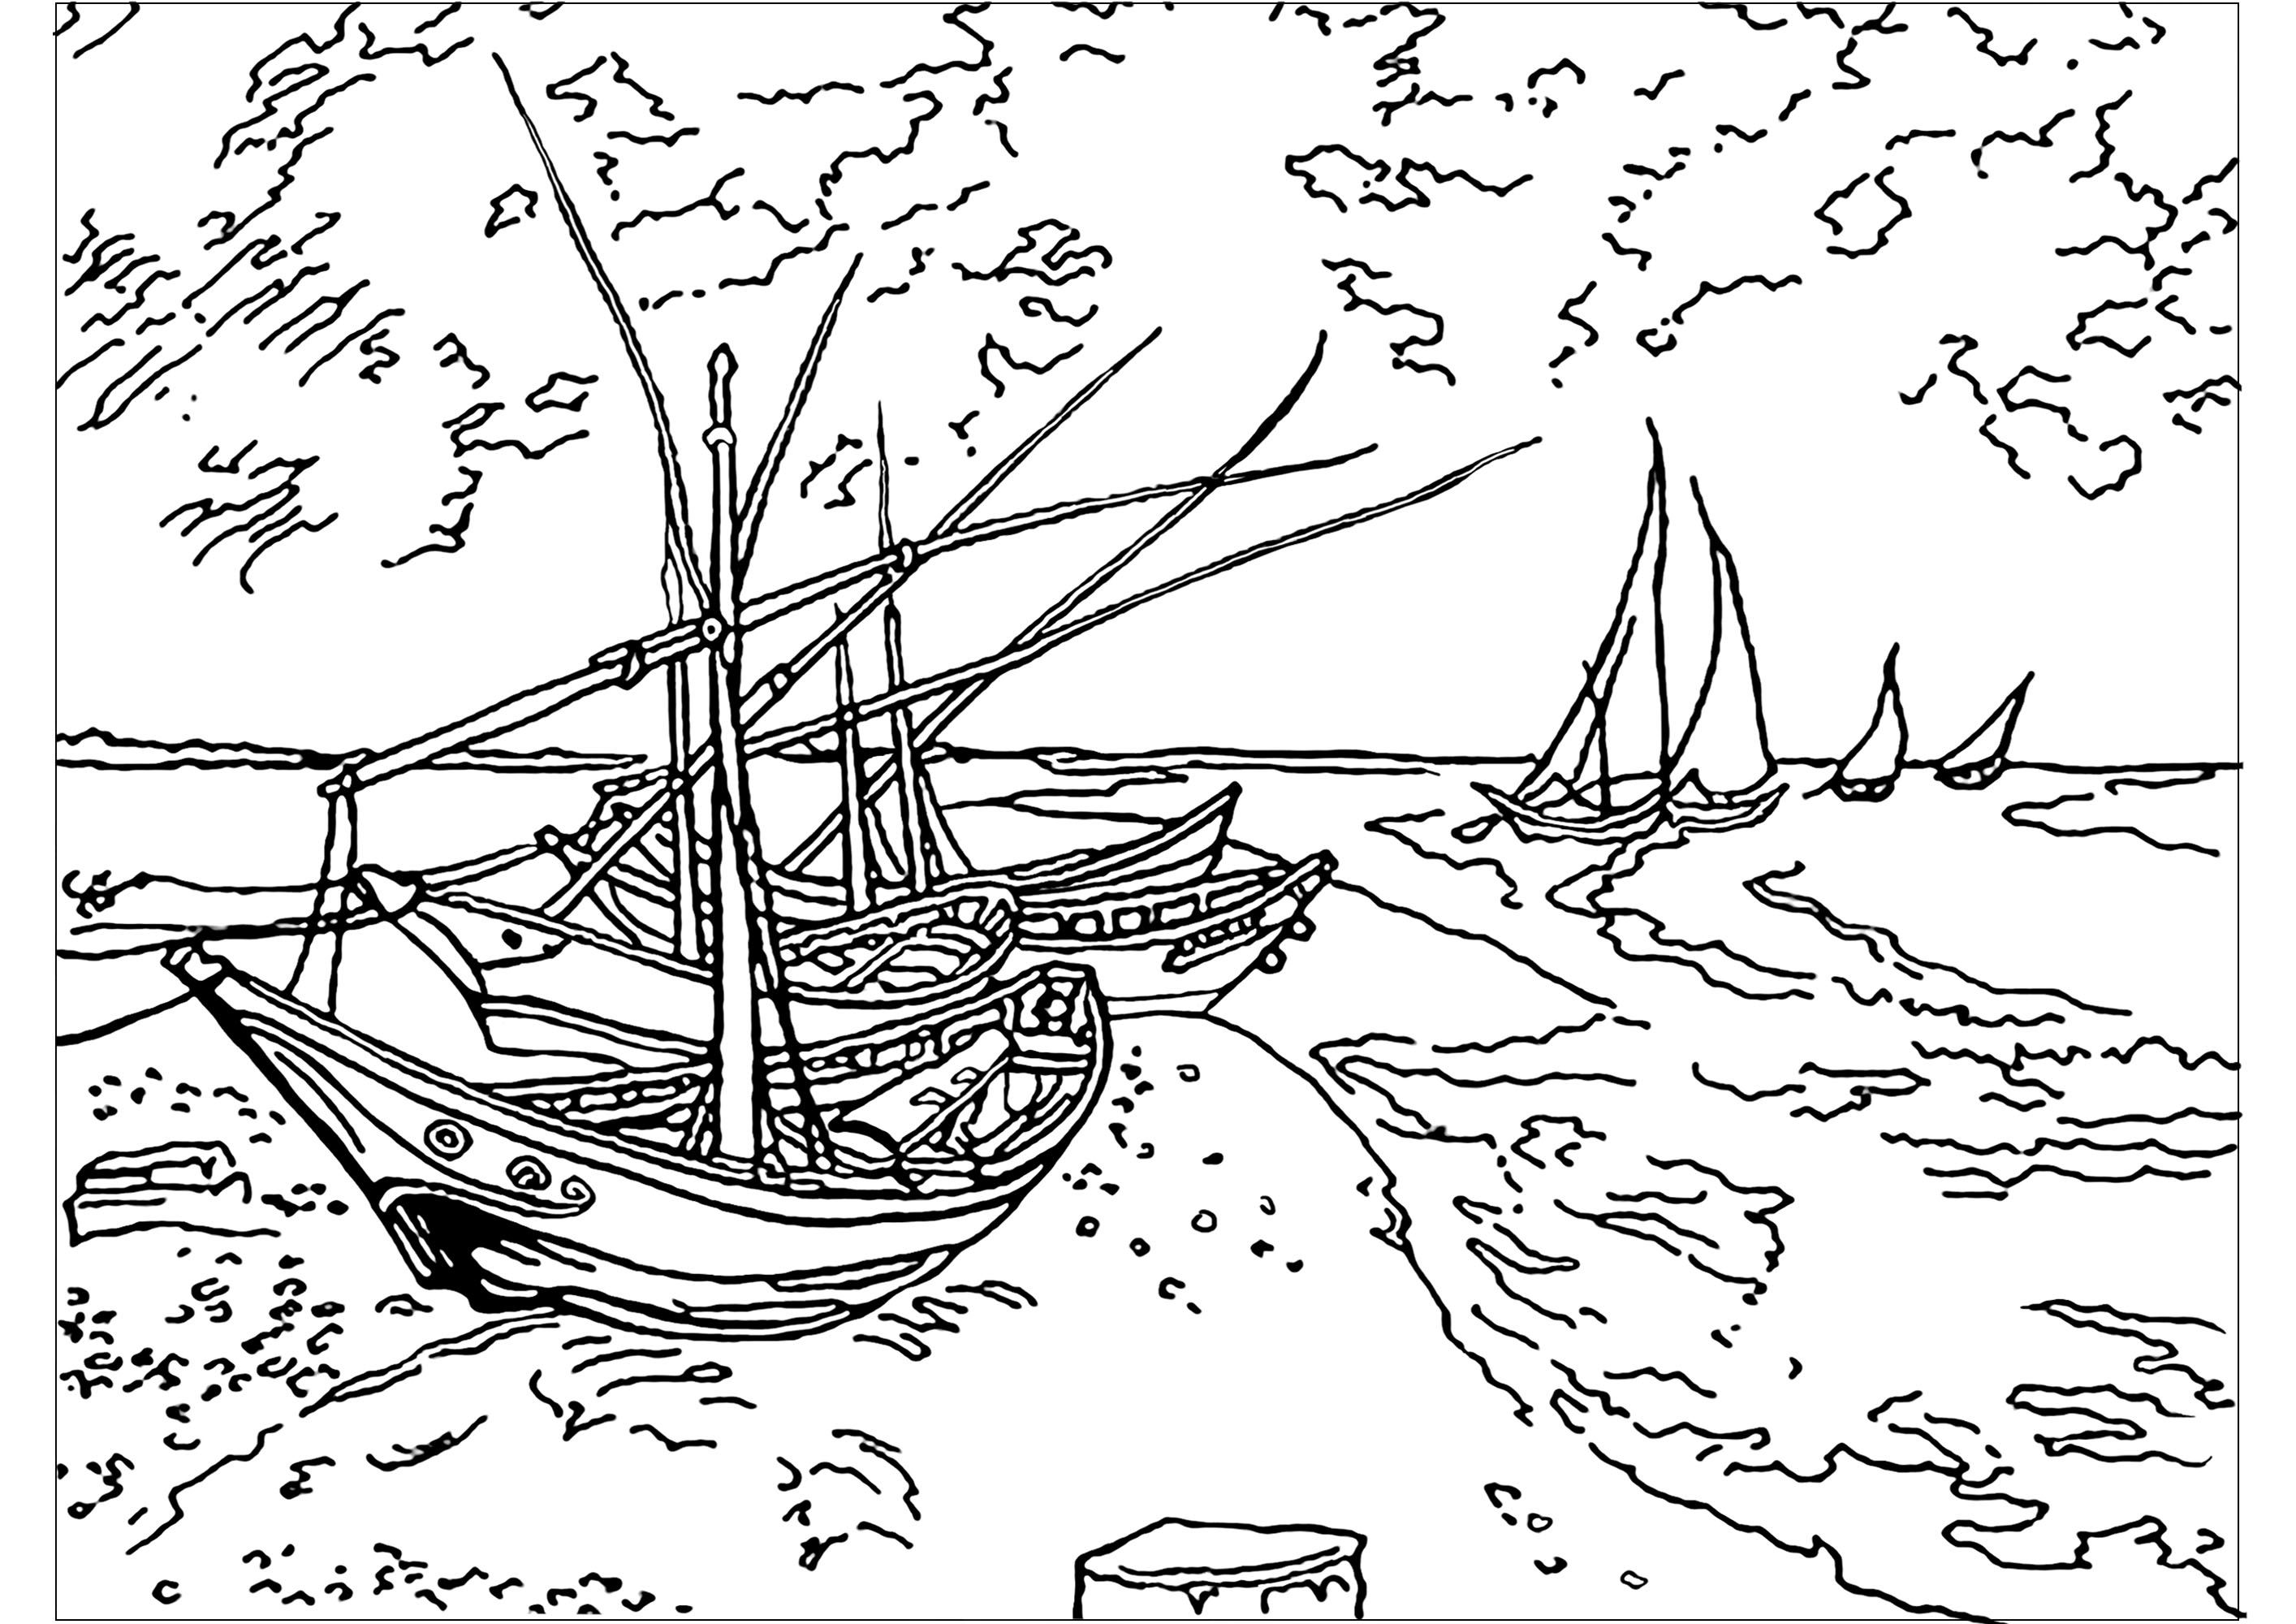 Van Gogh's image to color, easy for children